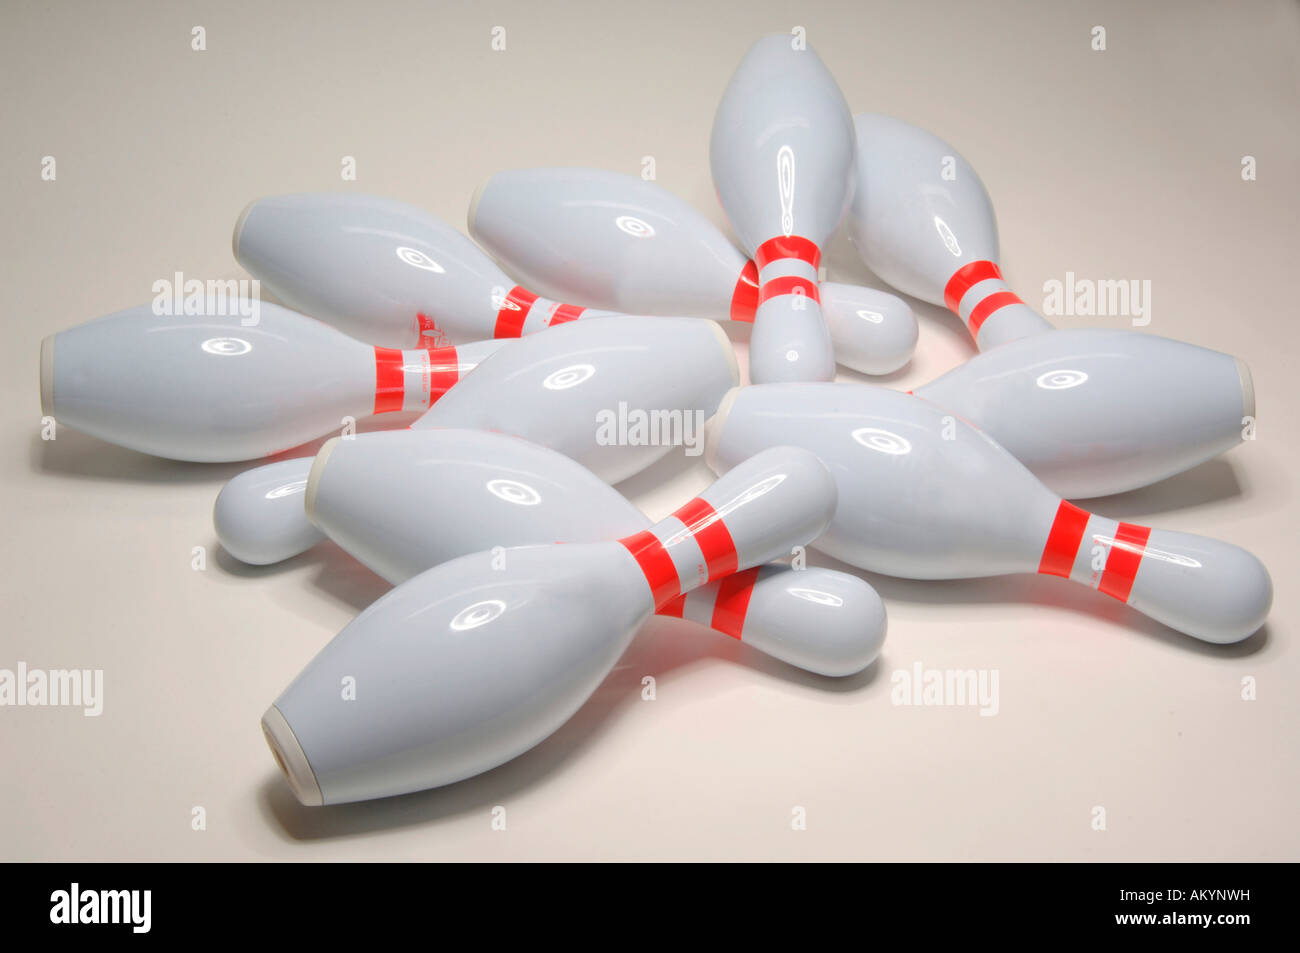 Bowled over bowling pins Stock Photo